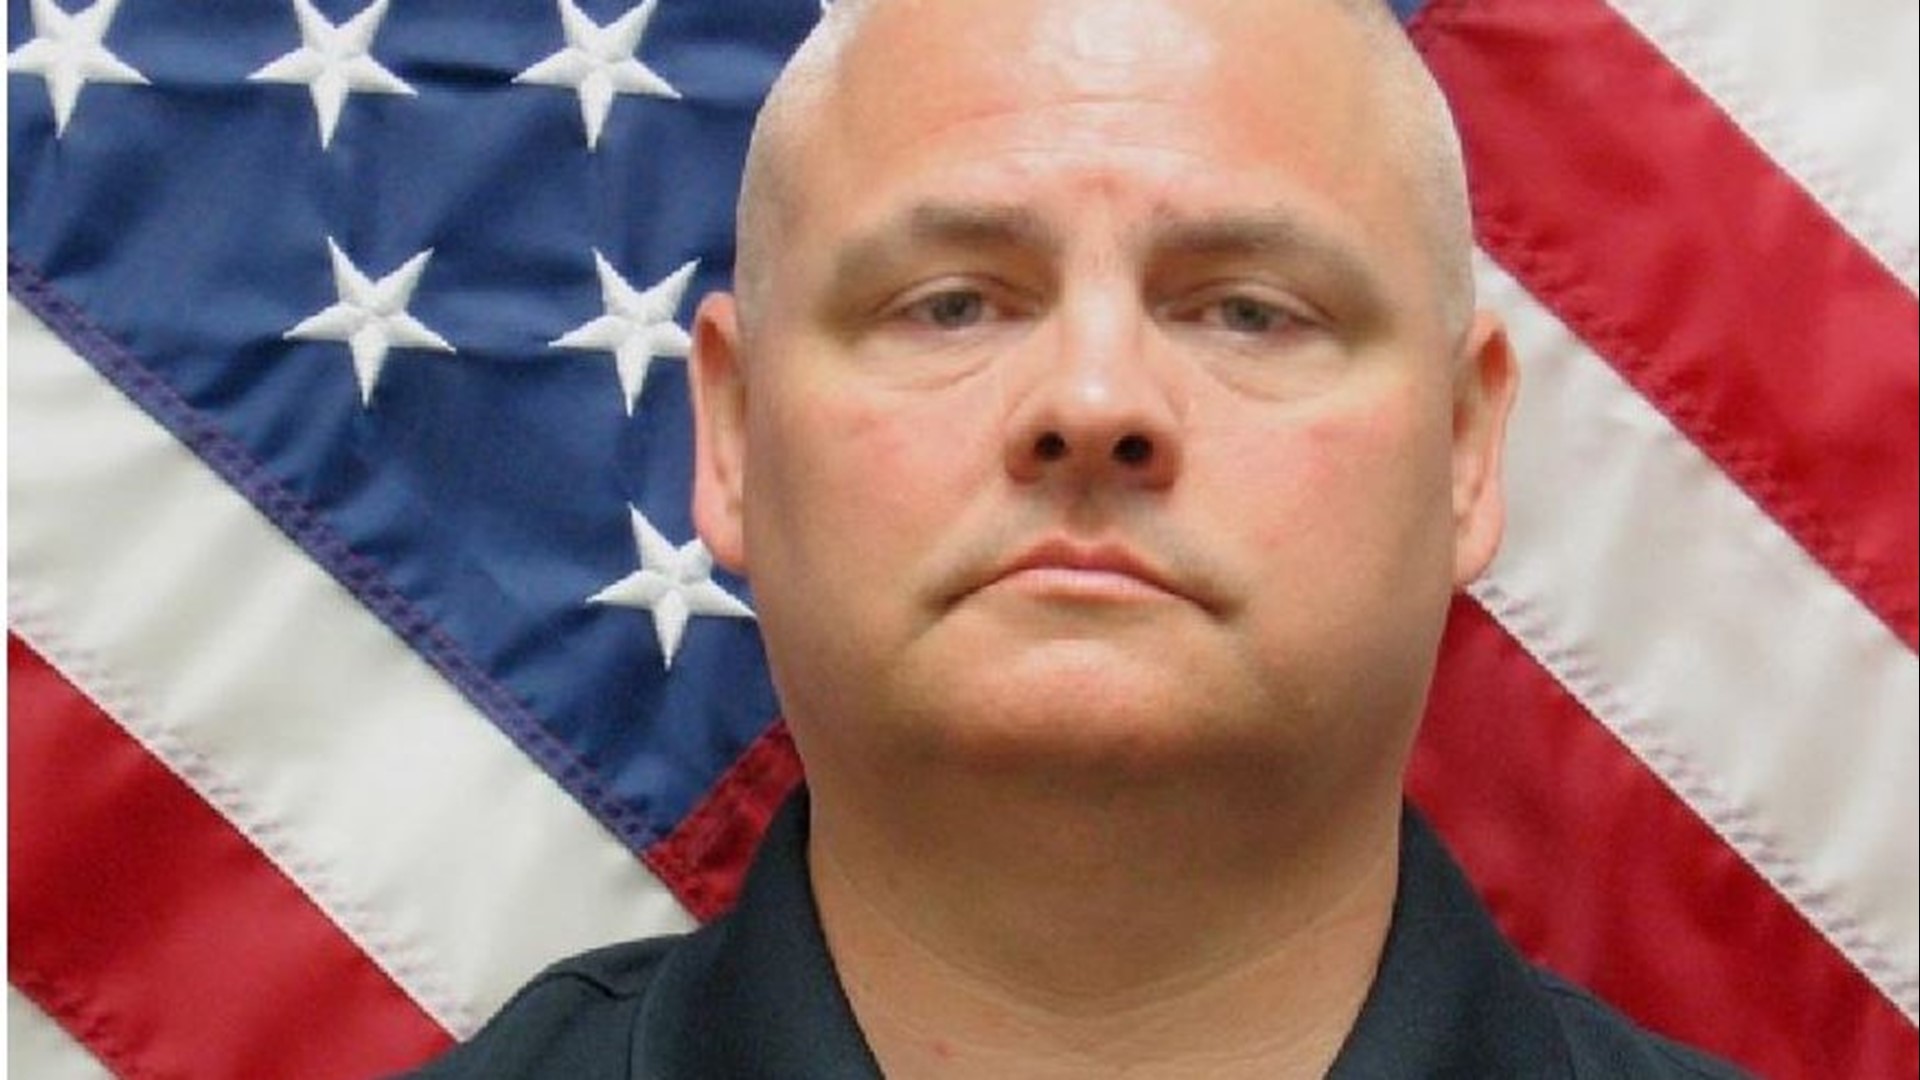 Grand jury indicts exHenry County officer seen in video choking former